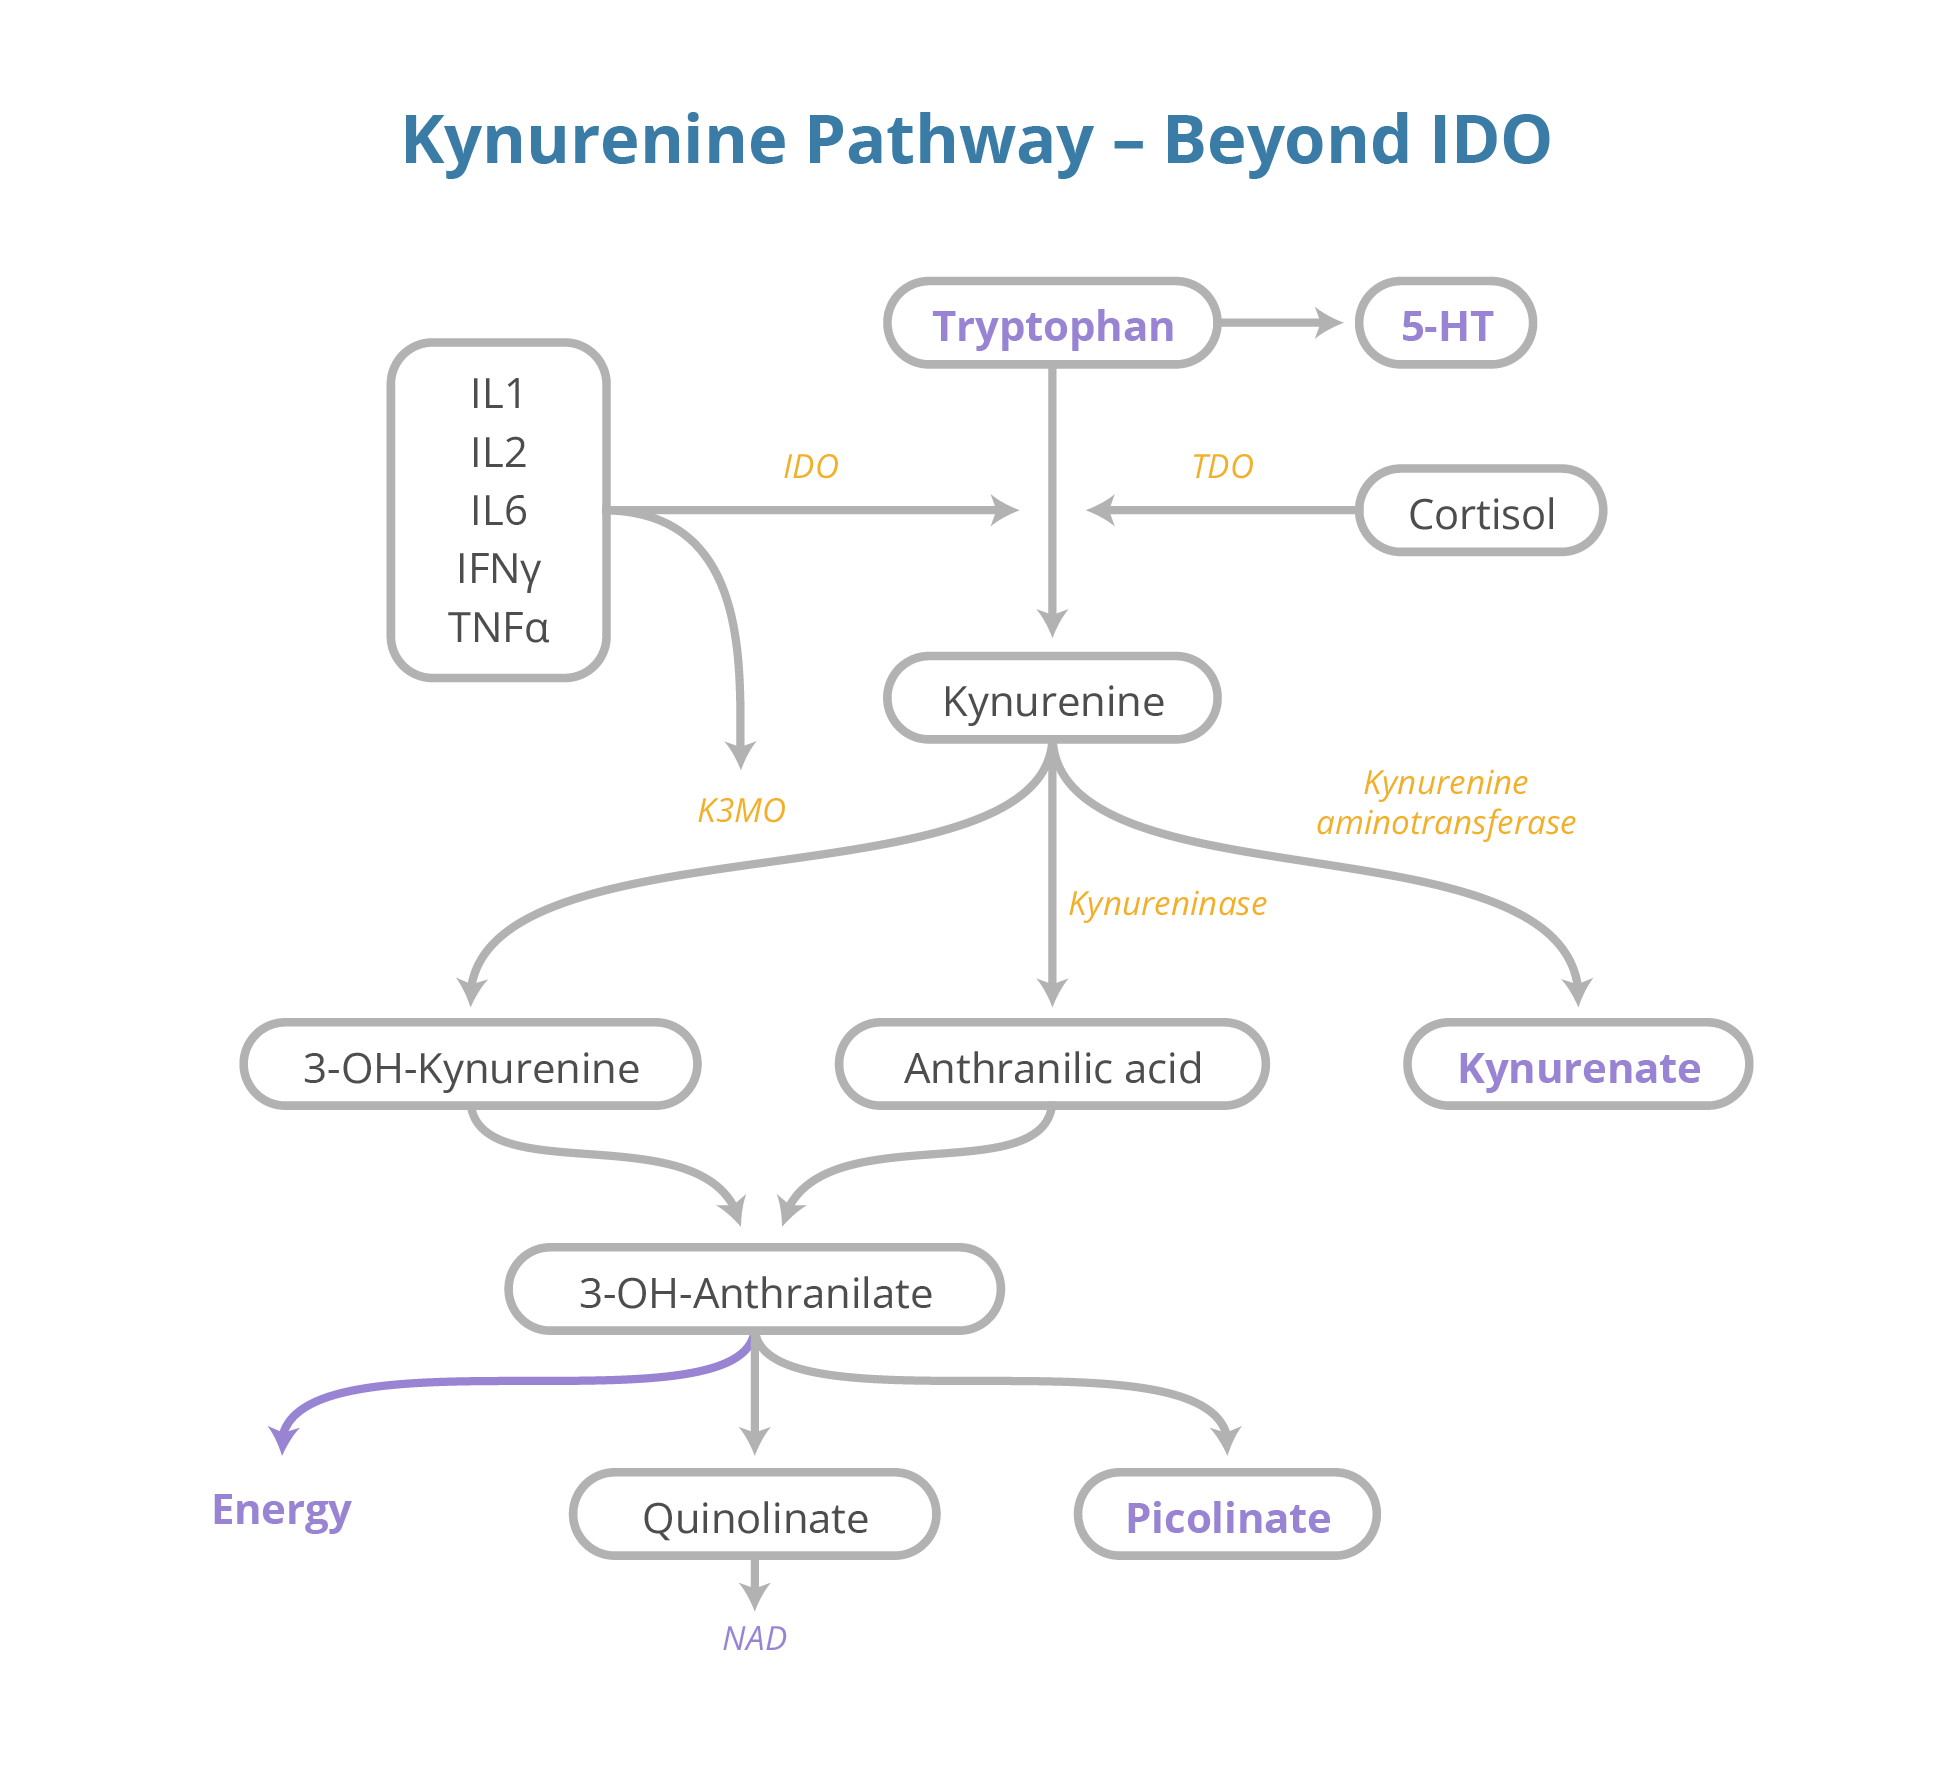 Checmical pathway from tryptophan to kynurenine to quinolinate